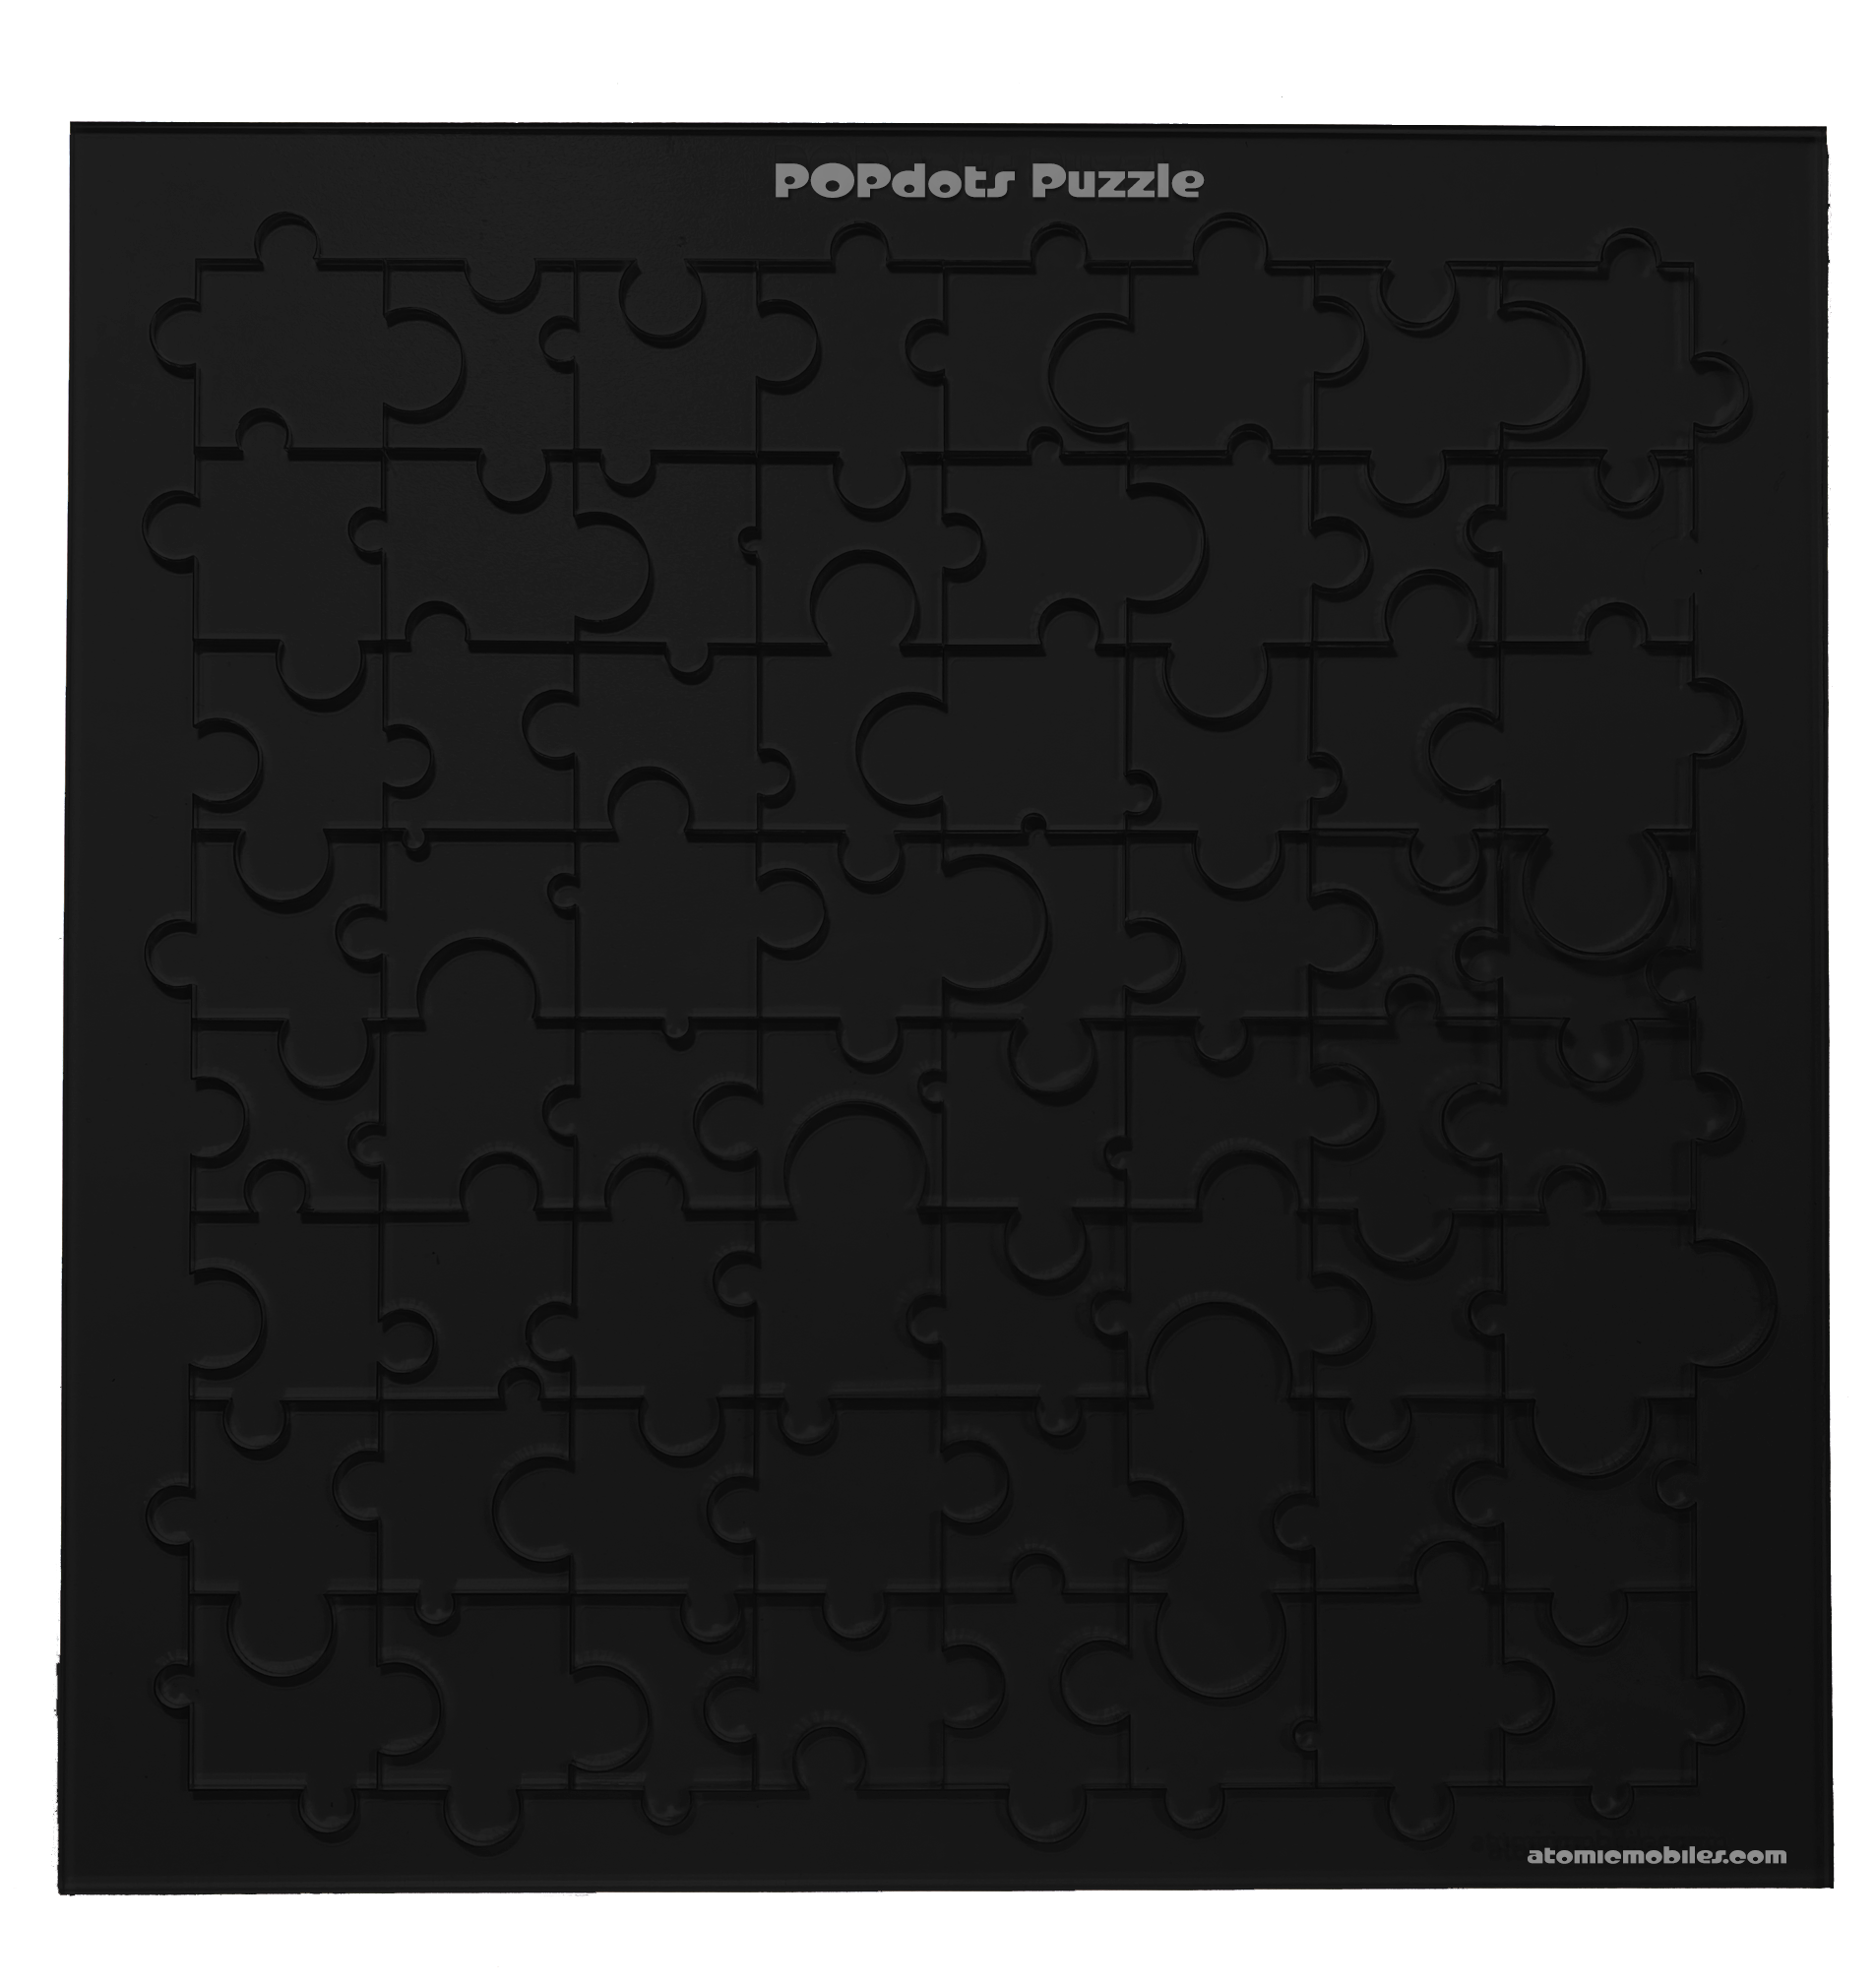 Glossy Black Modern Jigsaw Puzzle by AtomicMobiles.com